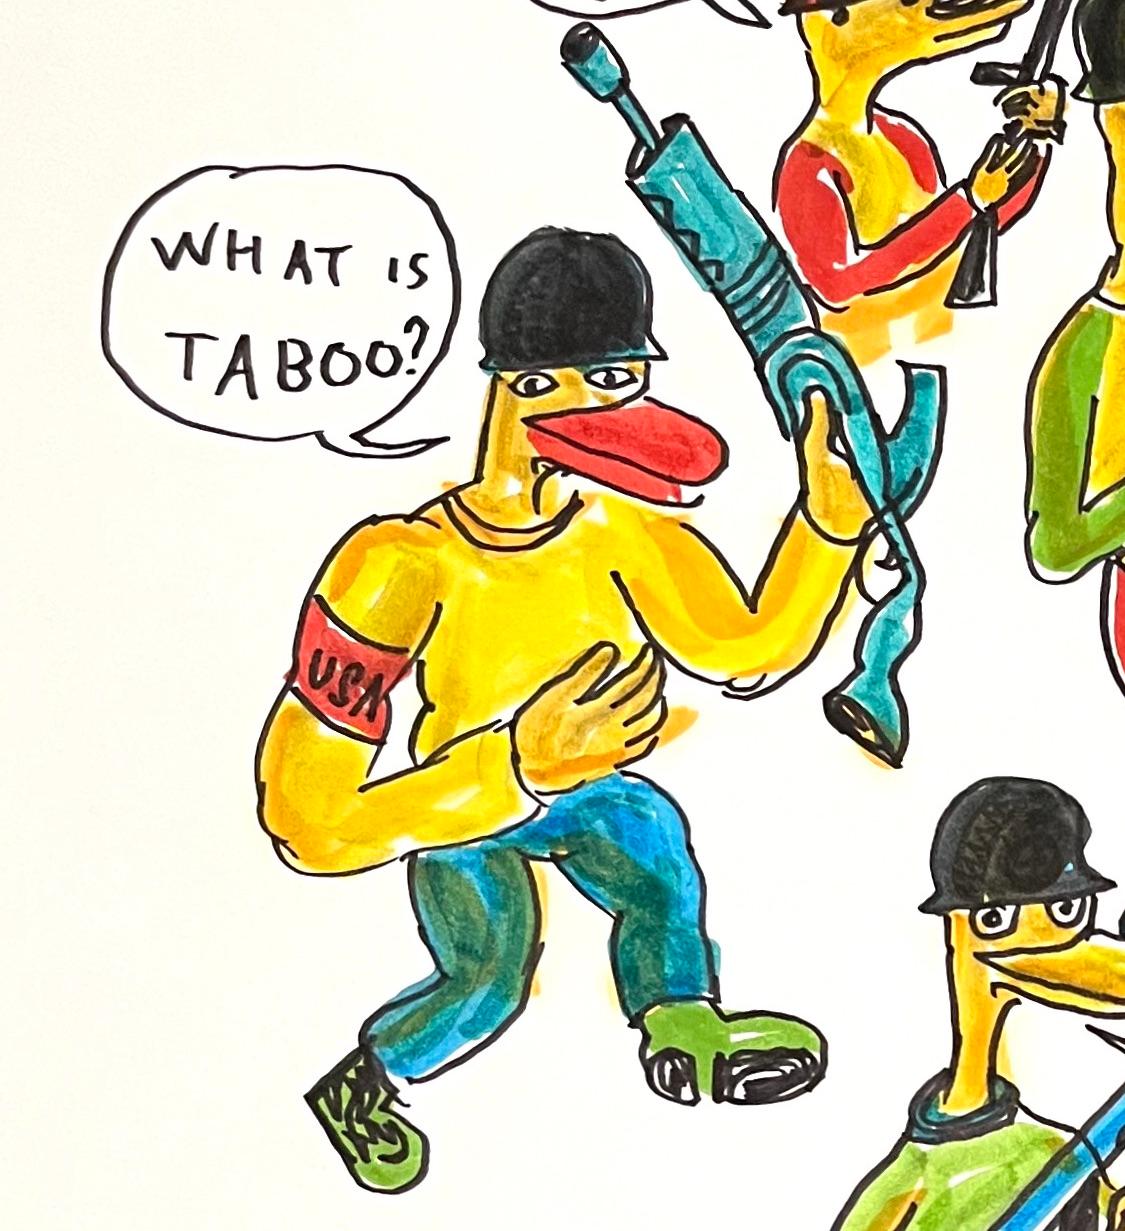 Golly There No End to War Before - Colorful Figurative Drawing, Duck Wars Series - Art by Daniel Johnston